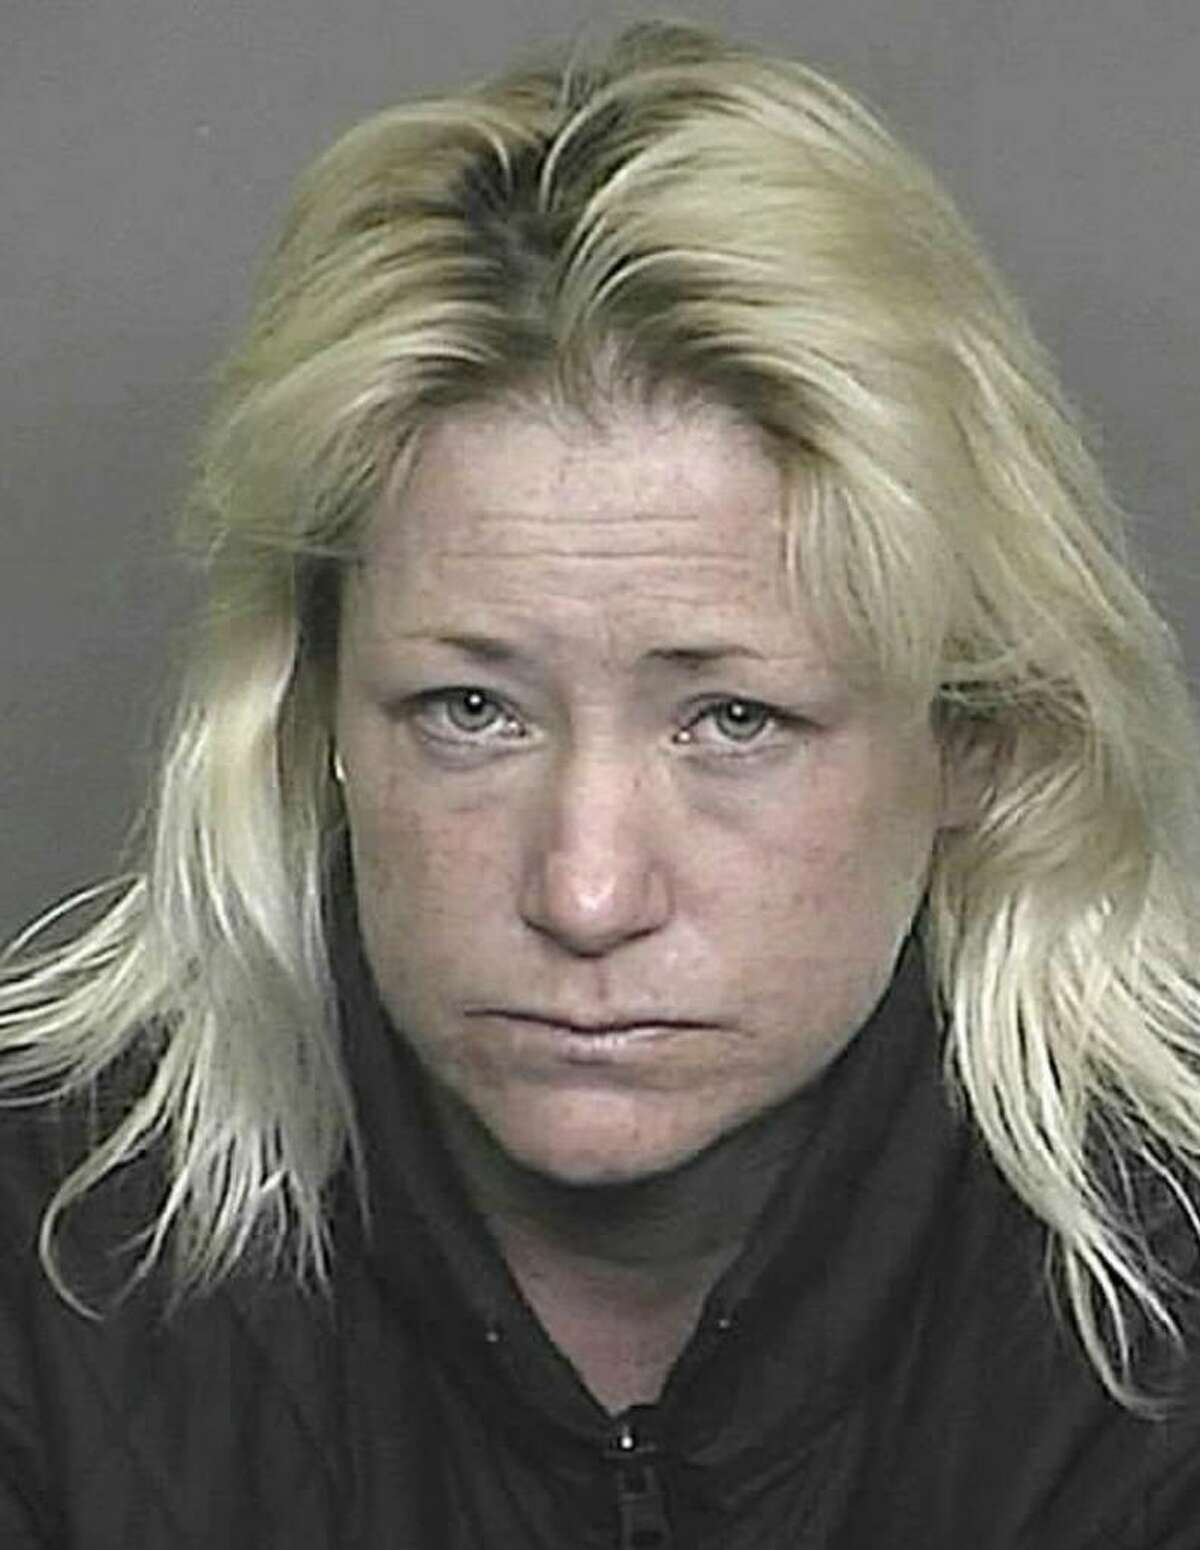 The trial has begun for Sandra Lee Jacobson, a Colorado woman shown in this January 2009 Denver police photo, who accused of driving drunk and killing two Greenwich librarians last year near the Denver airport.